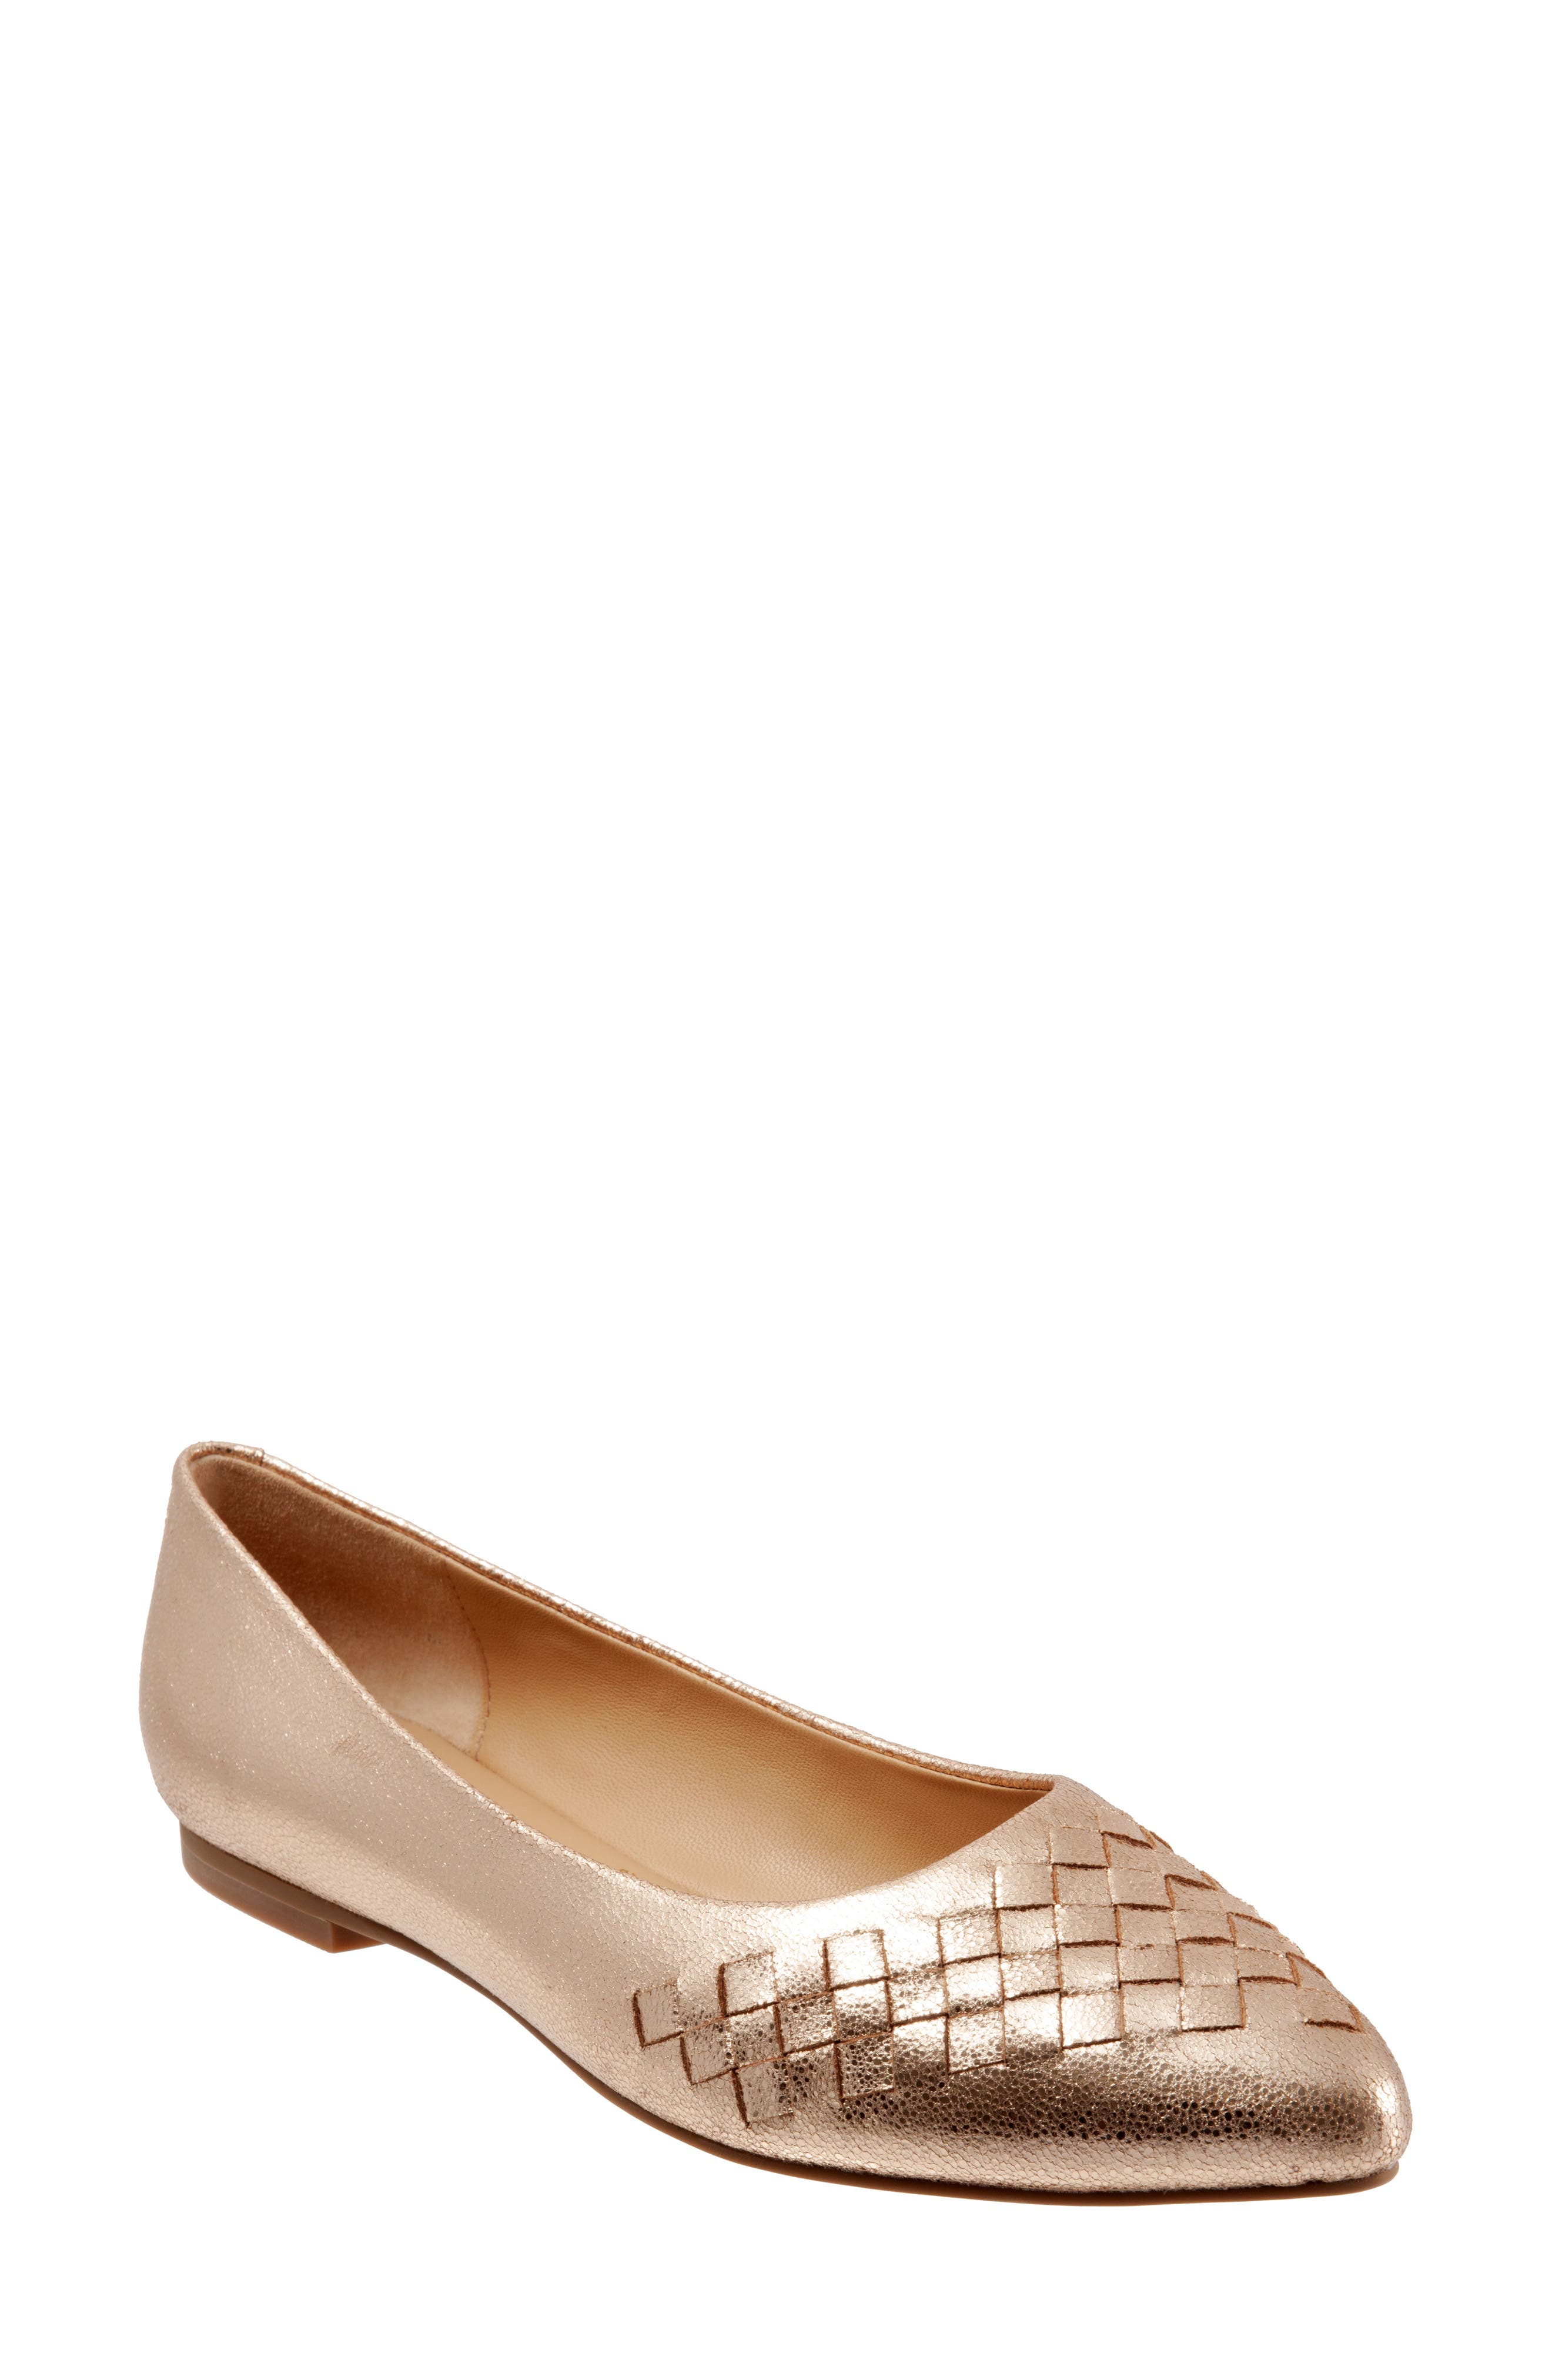 trotters estee pointed toe flat